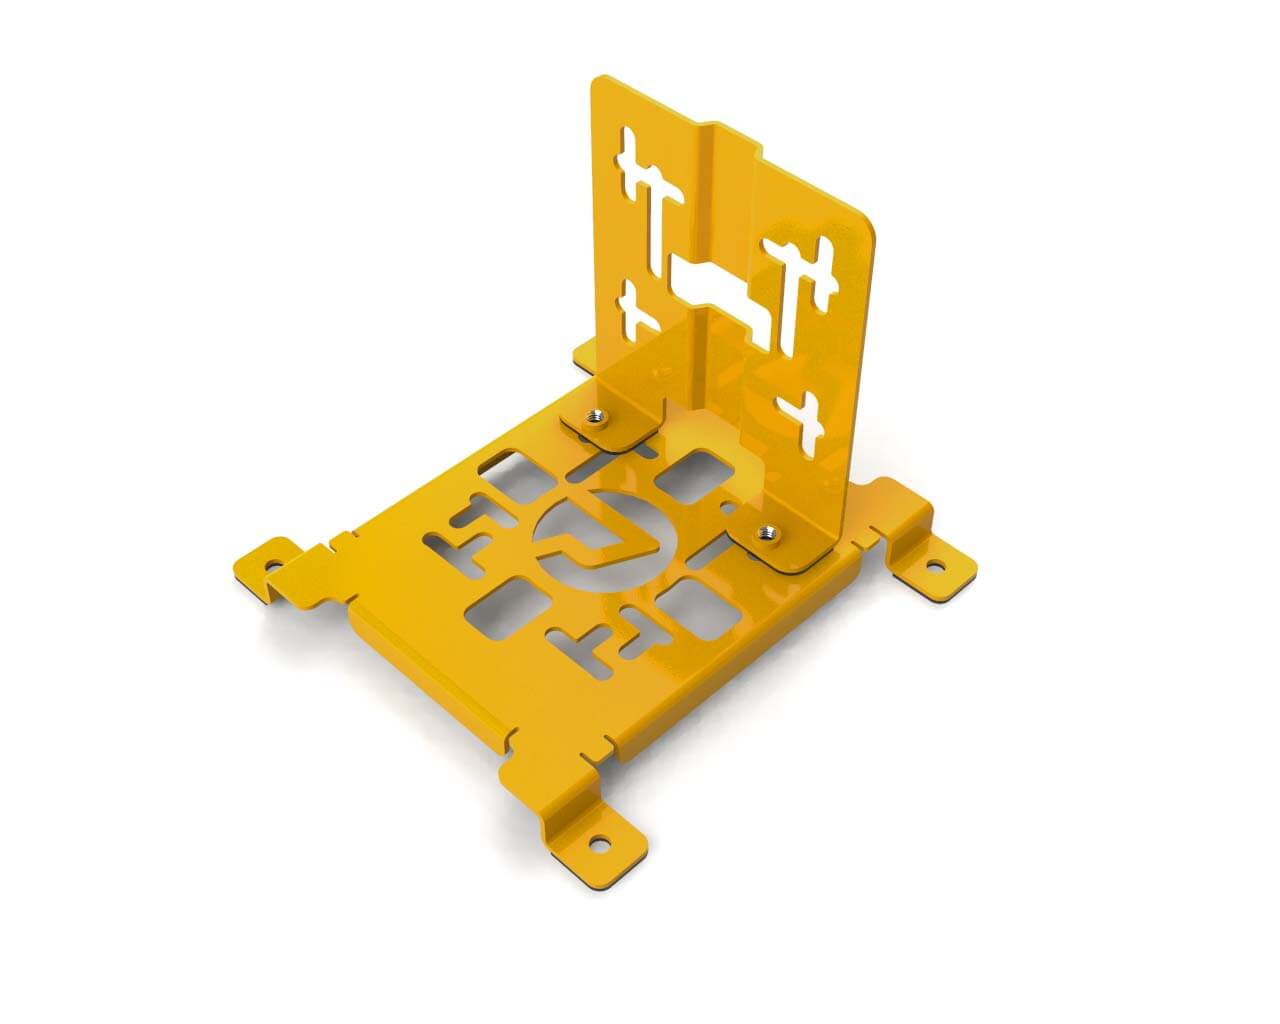 PrimoChill SX Universal Spider Mount Bracket Kit - 120mm Series - PrimoChill - KEEPING IT COOL Yellow